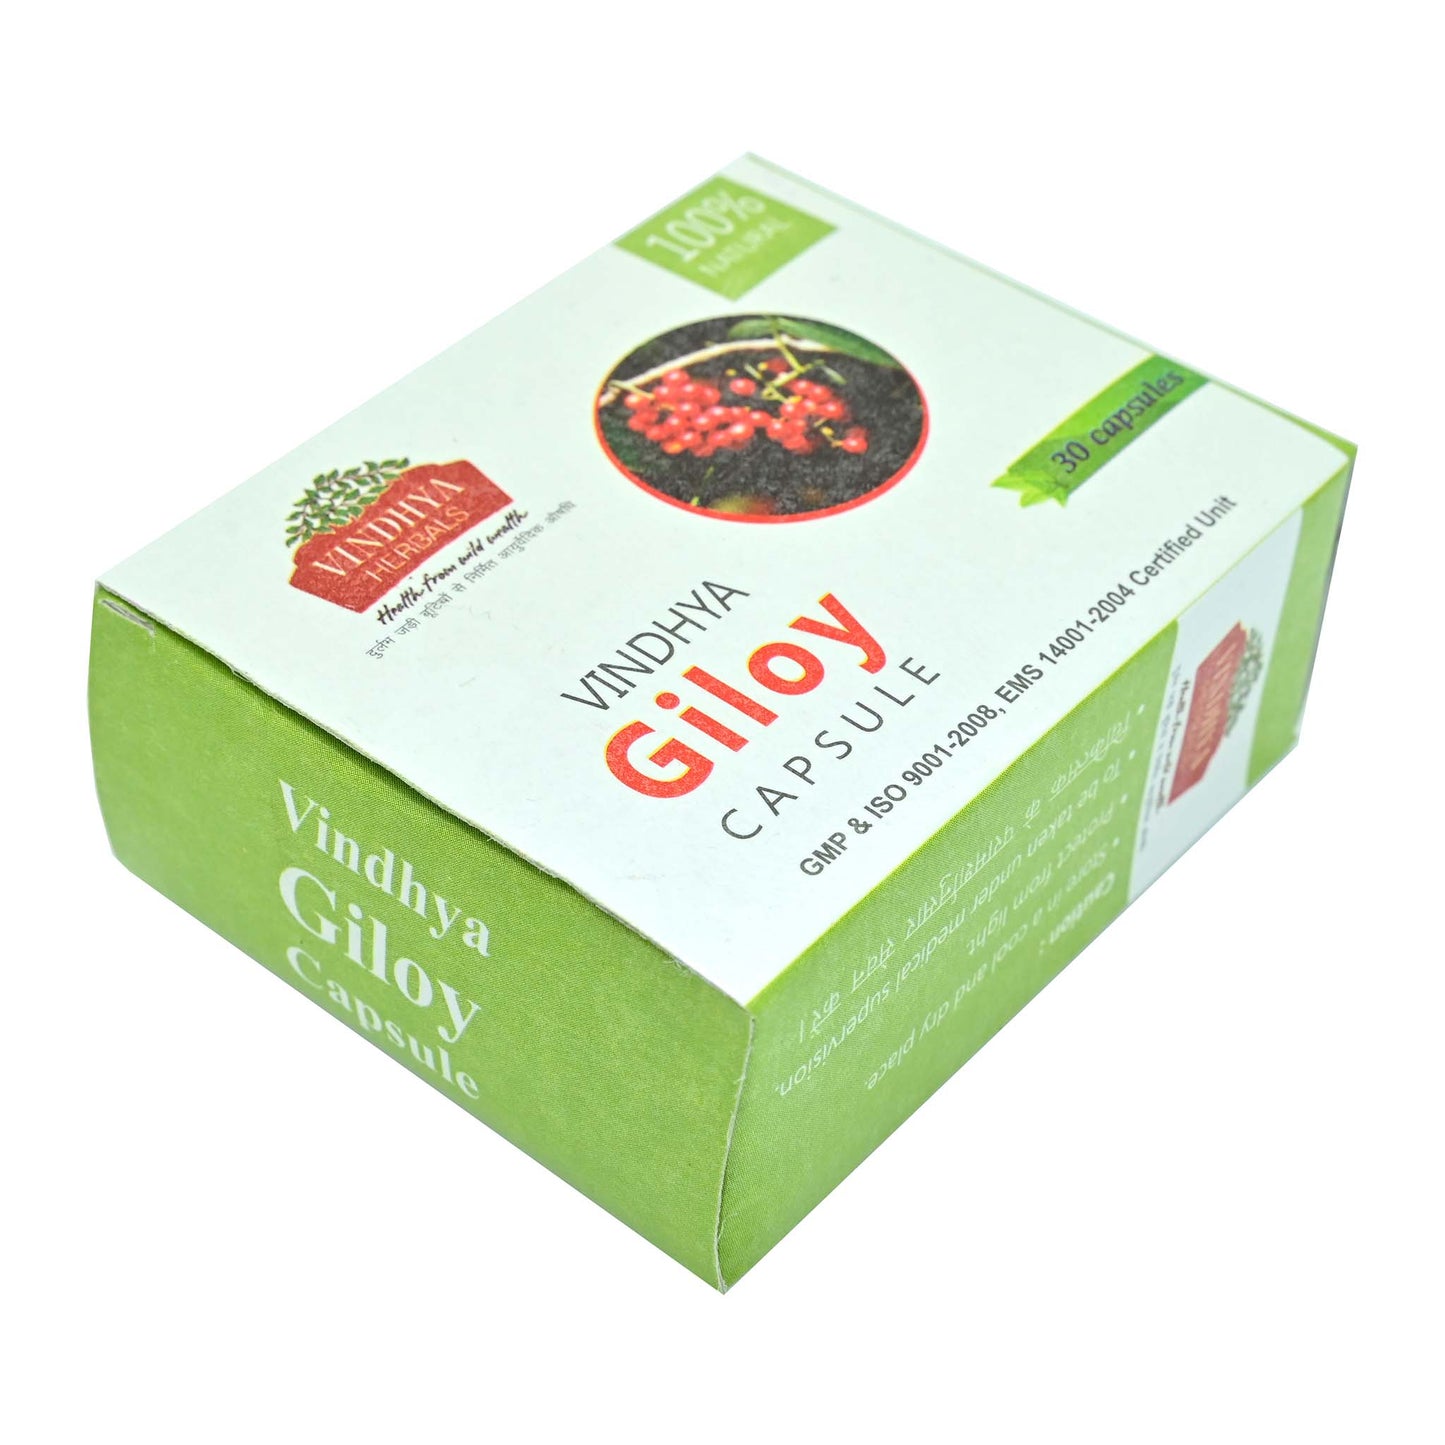 Giloe/Giloy Capsule - Your Natural Rejuvenator and Immunity Booster